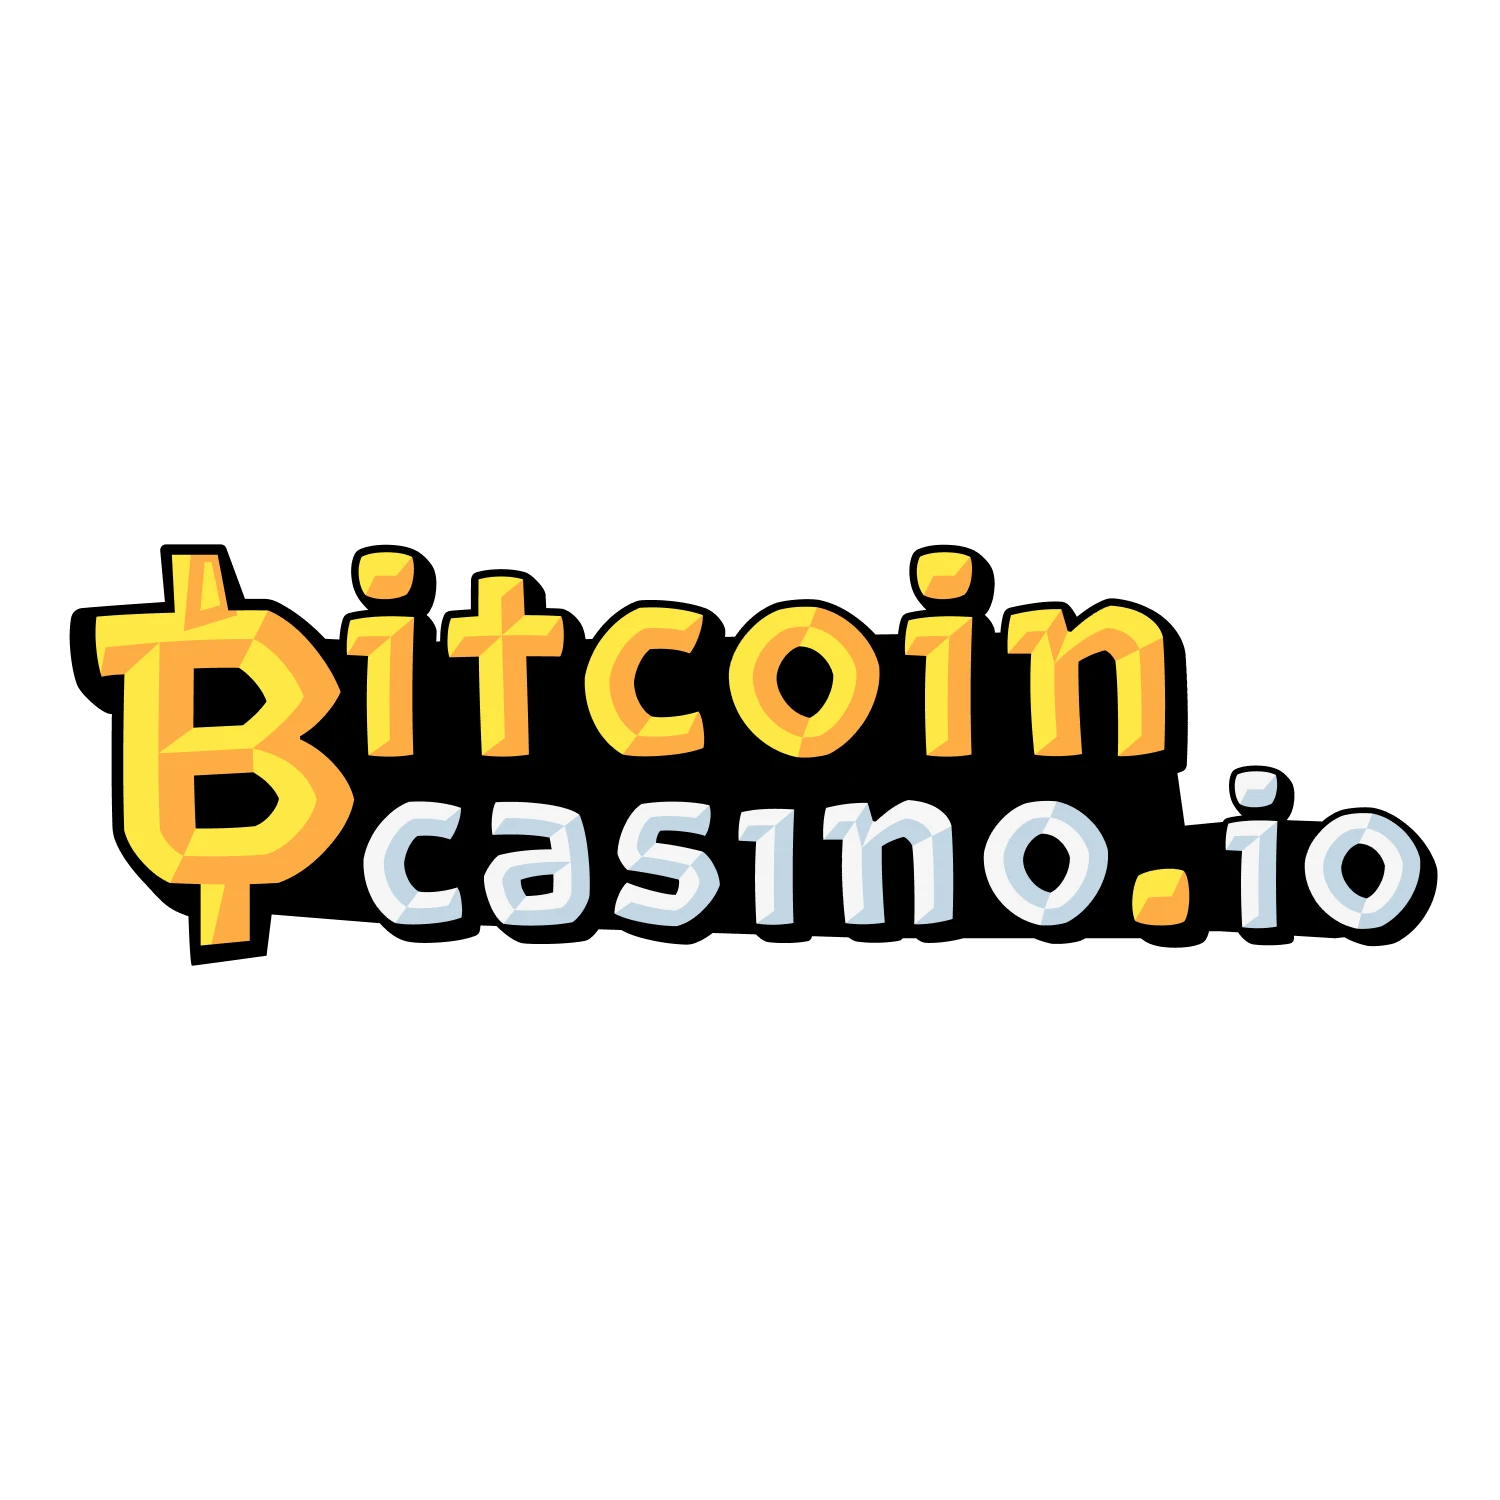 Bitcoincasino accept many different cryptocurrencies for betting.